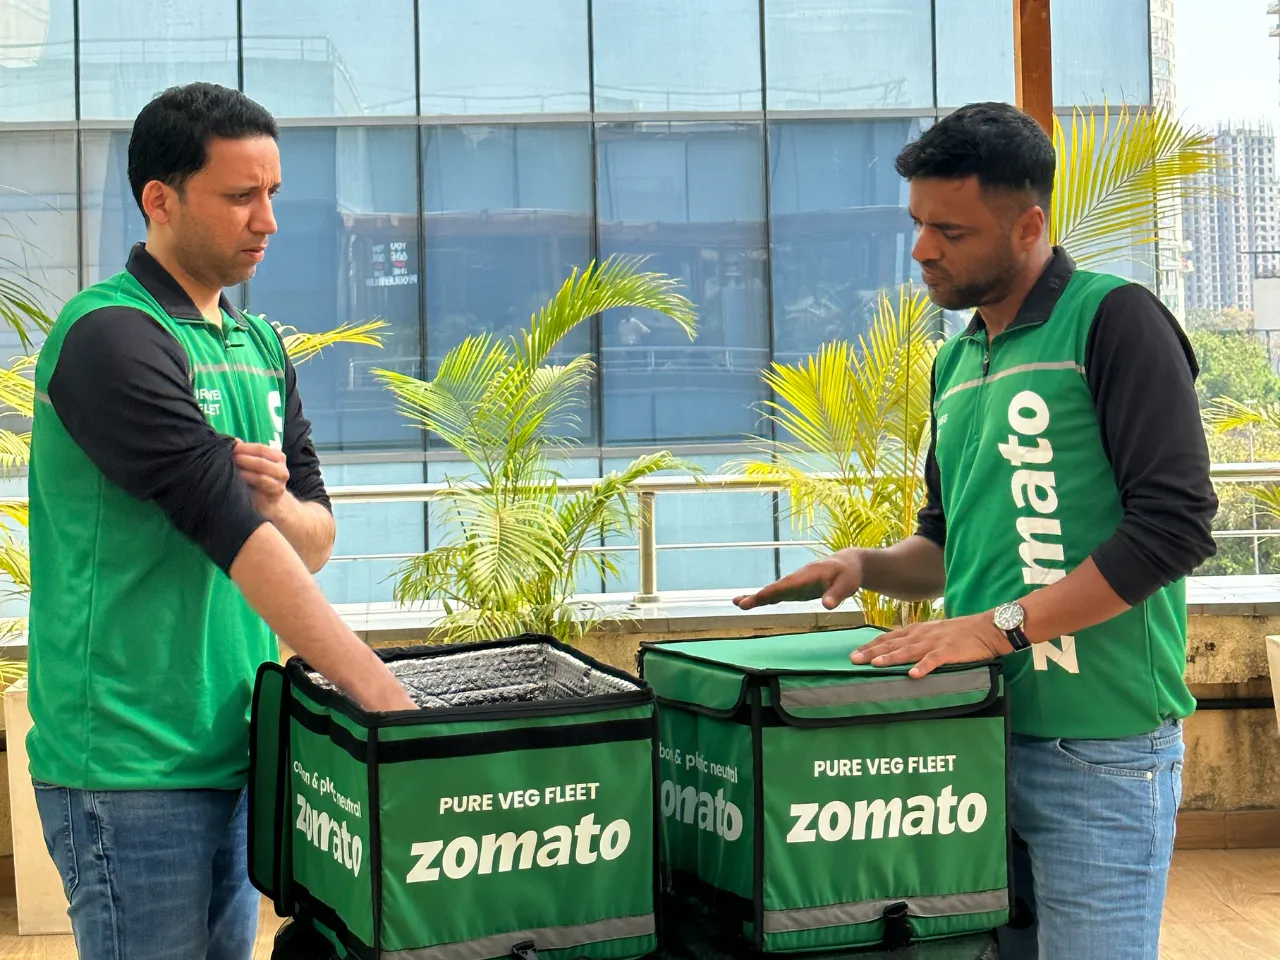 Zomato launches separate fleet for pure vegetarian customers